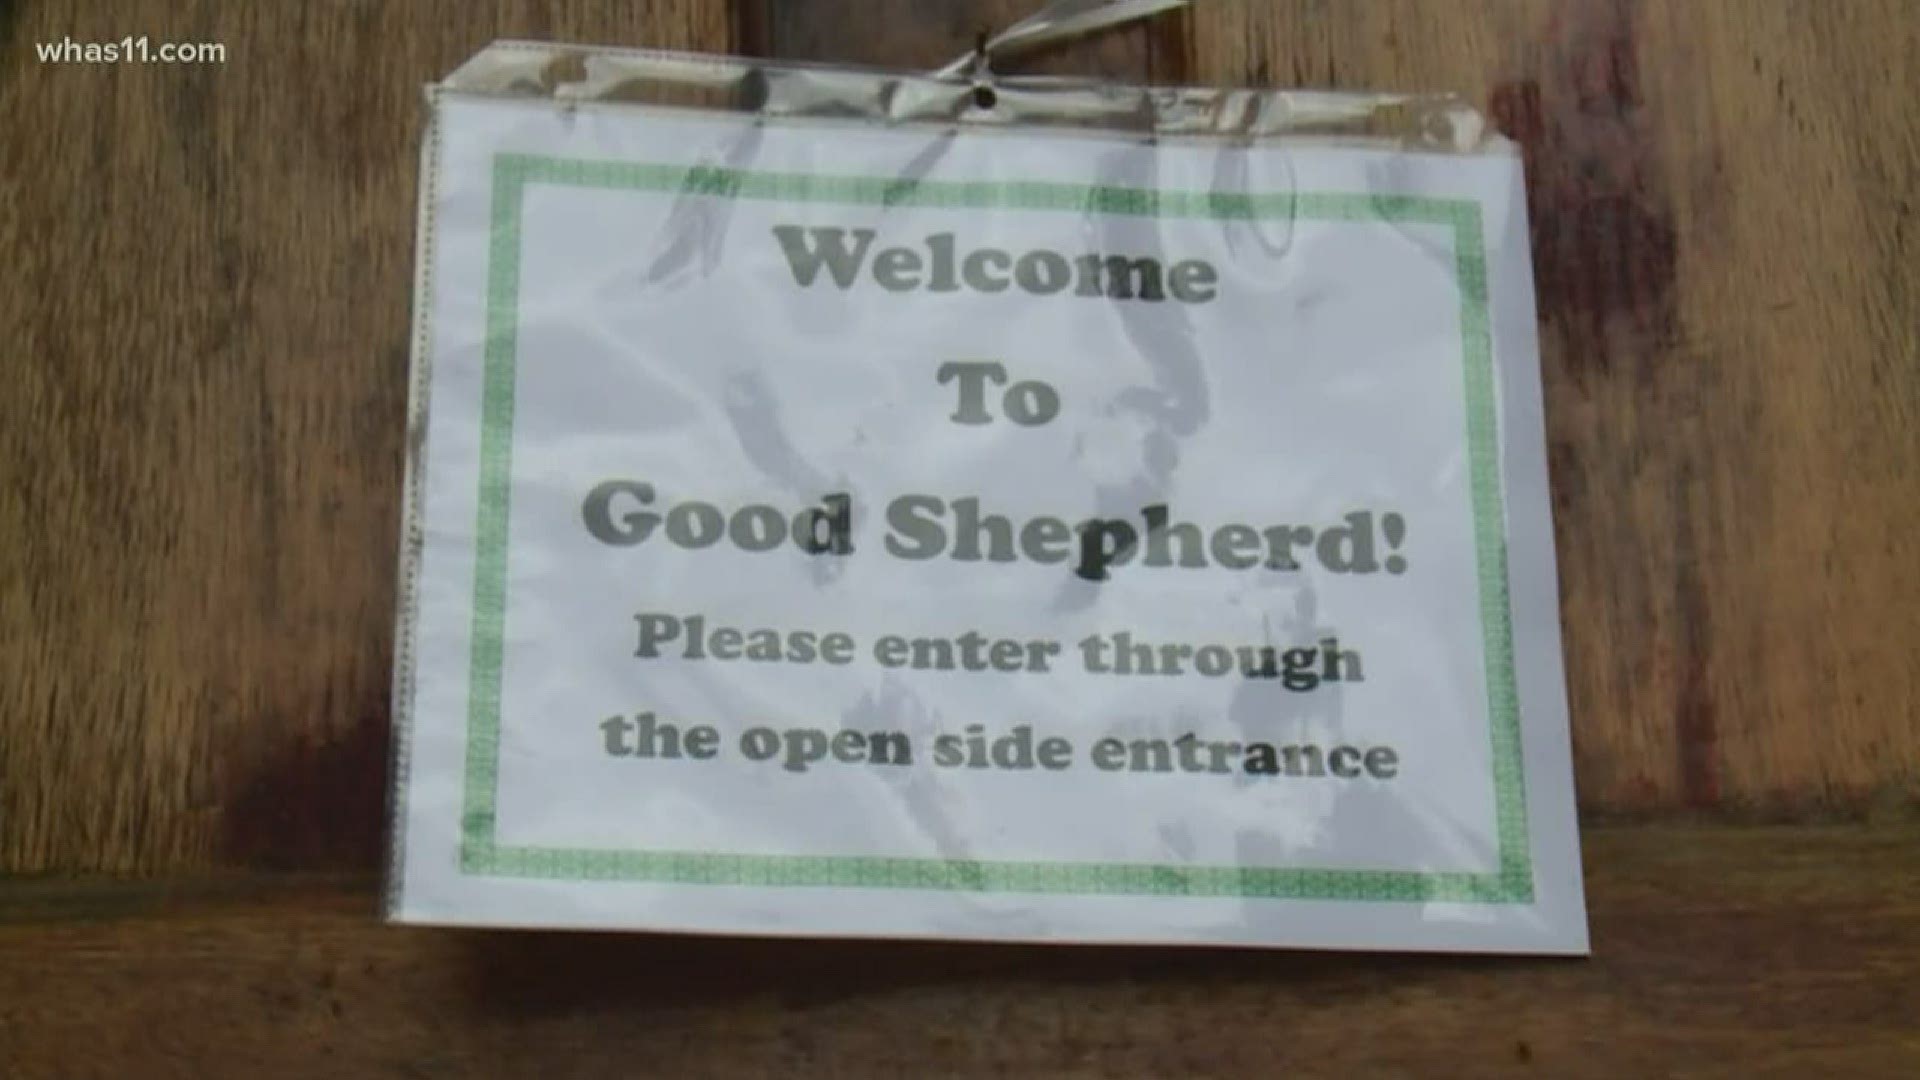 An abundance of hand sanitizer and social distancing enforcement at Good Shepherd are just some of the changes at local churches.